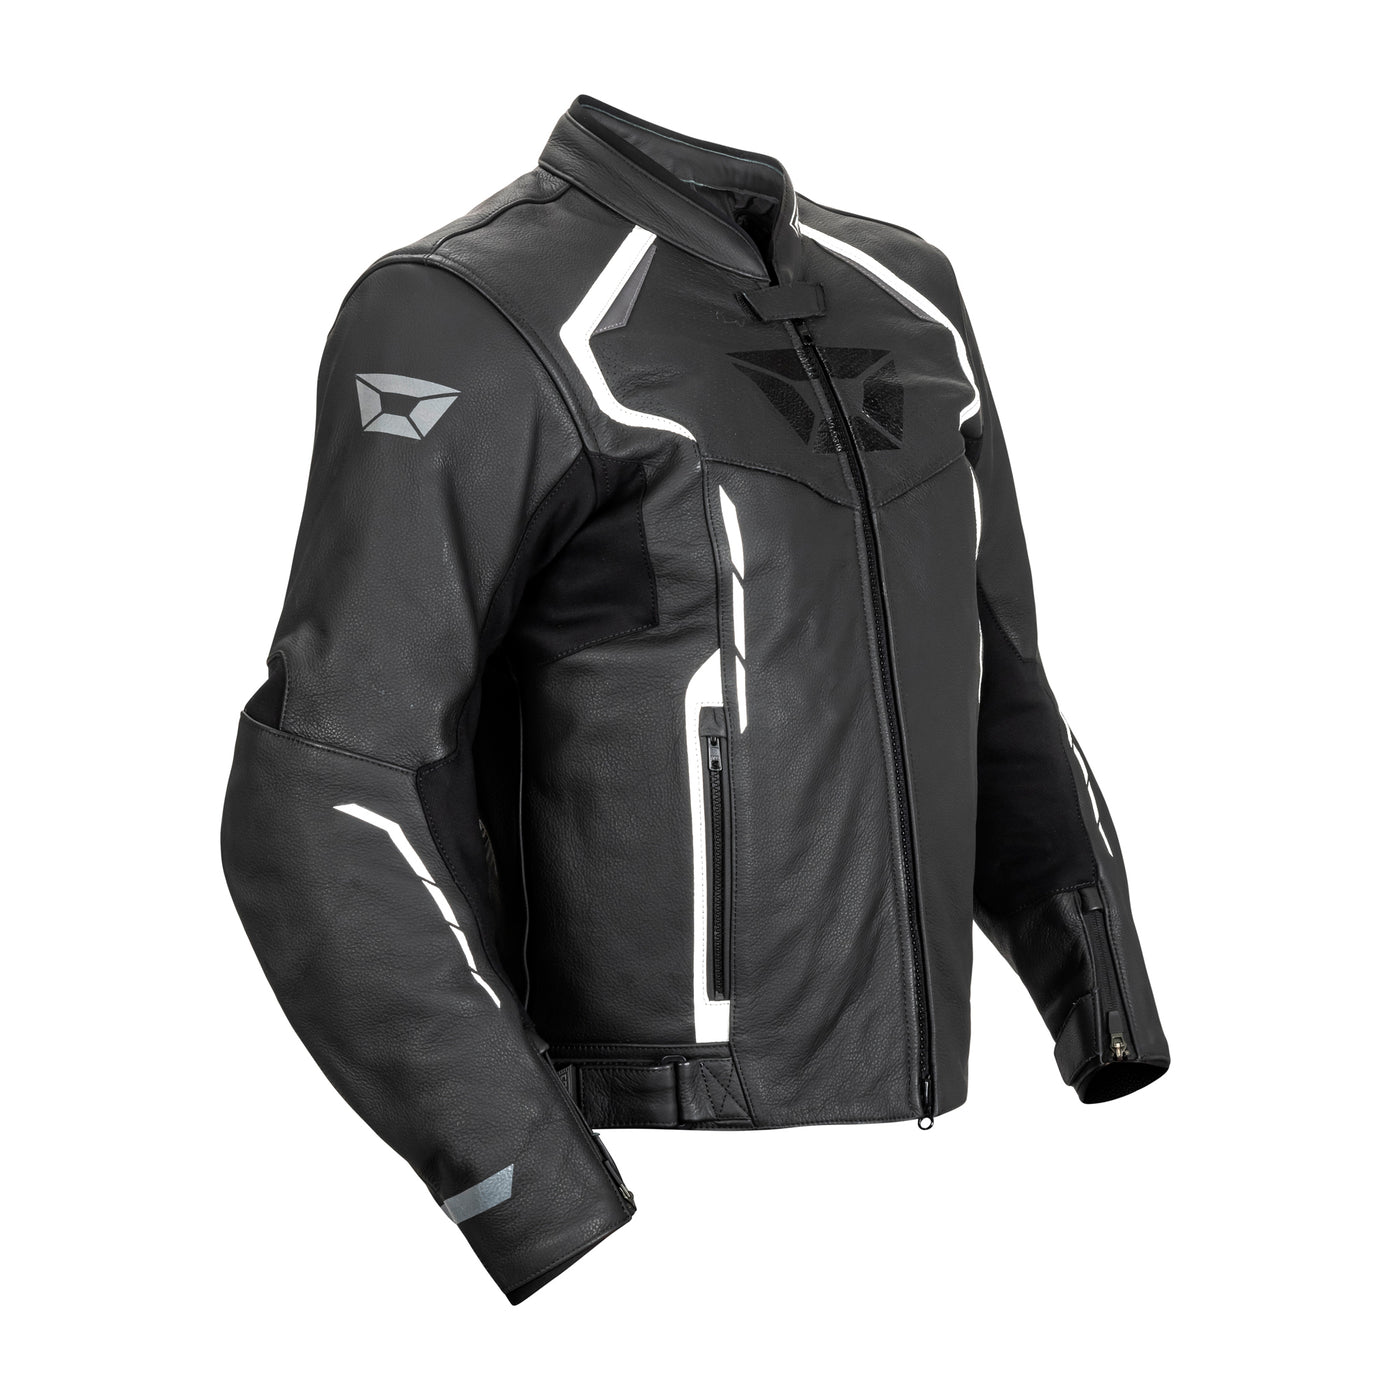 Cortech Speedway Chicane Leather Jacket